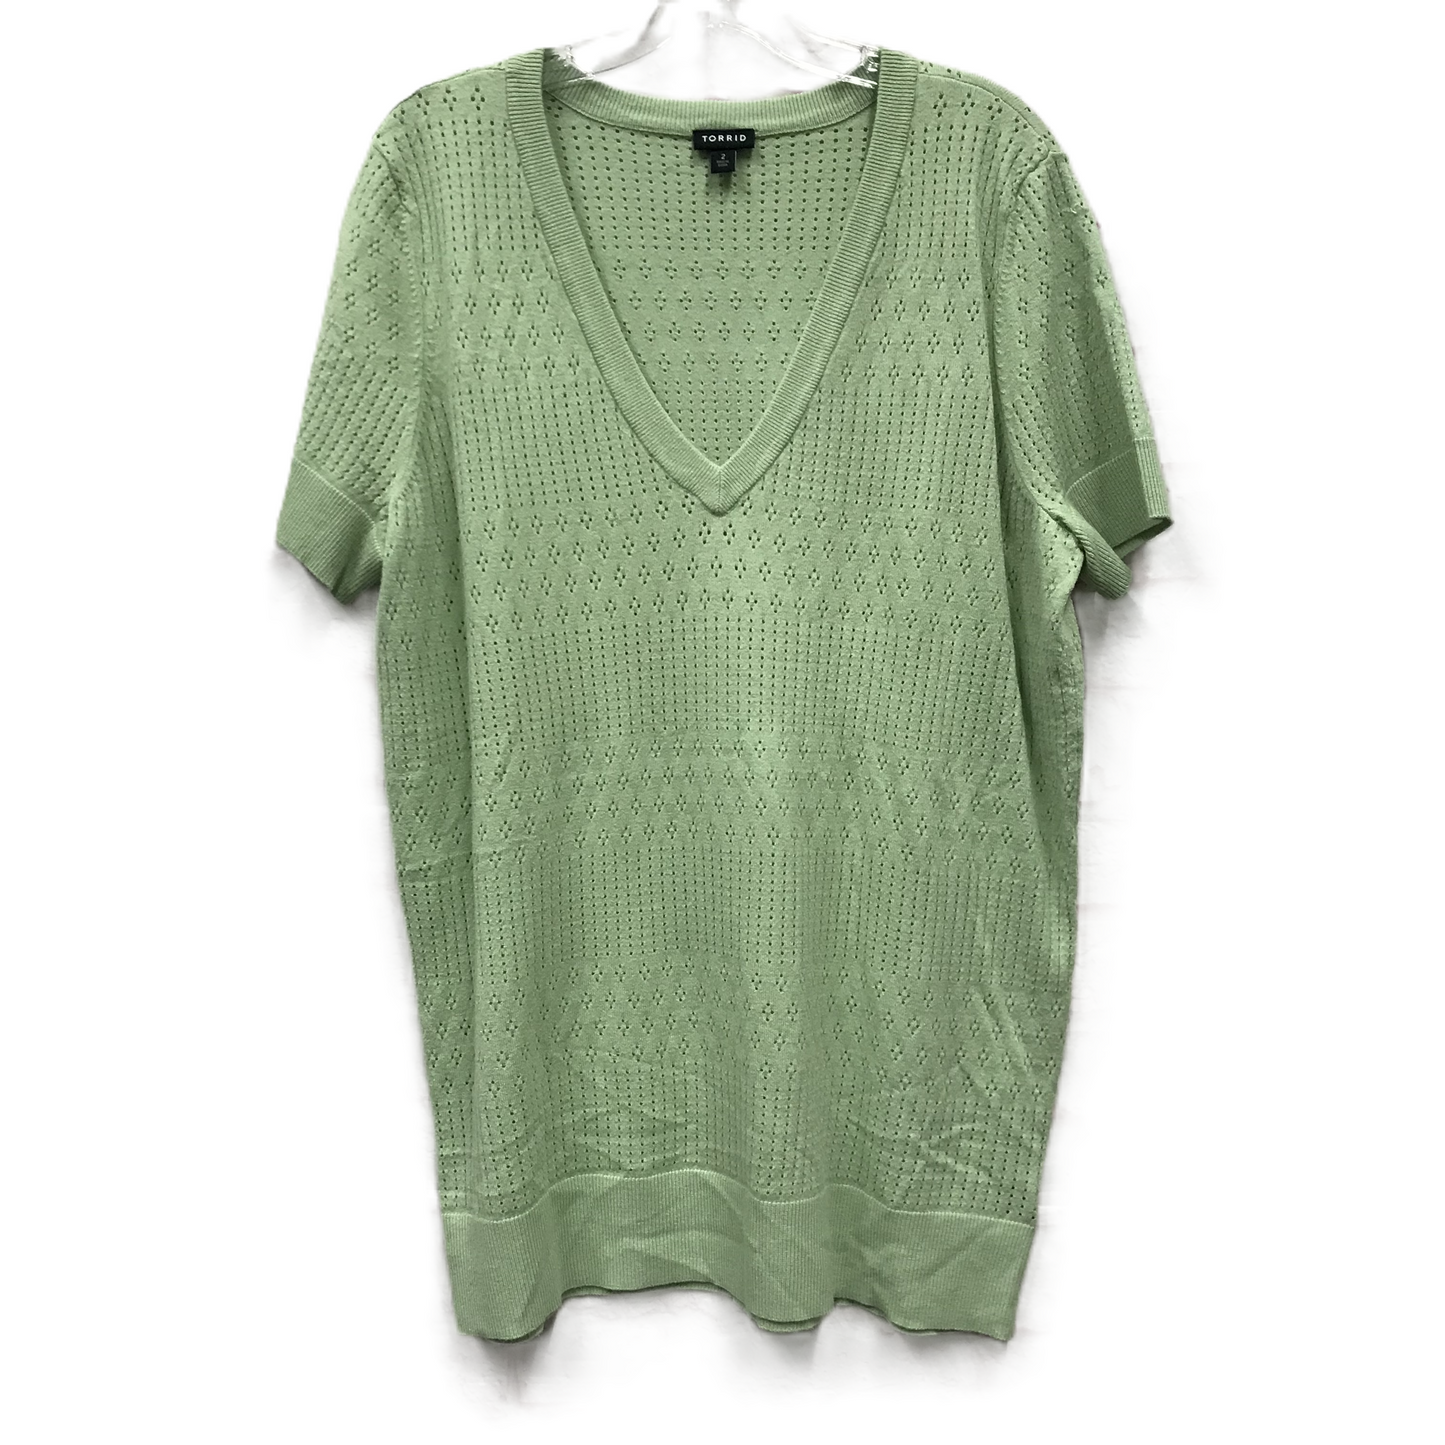 Green Top Short Sleeve By Torrid, Size: 2x